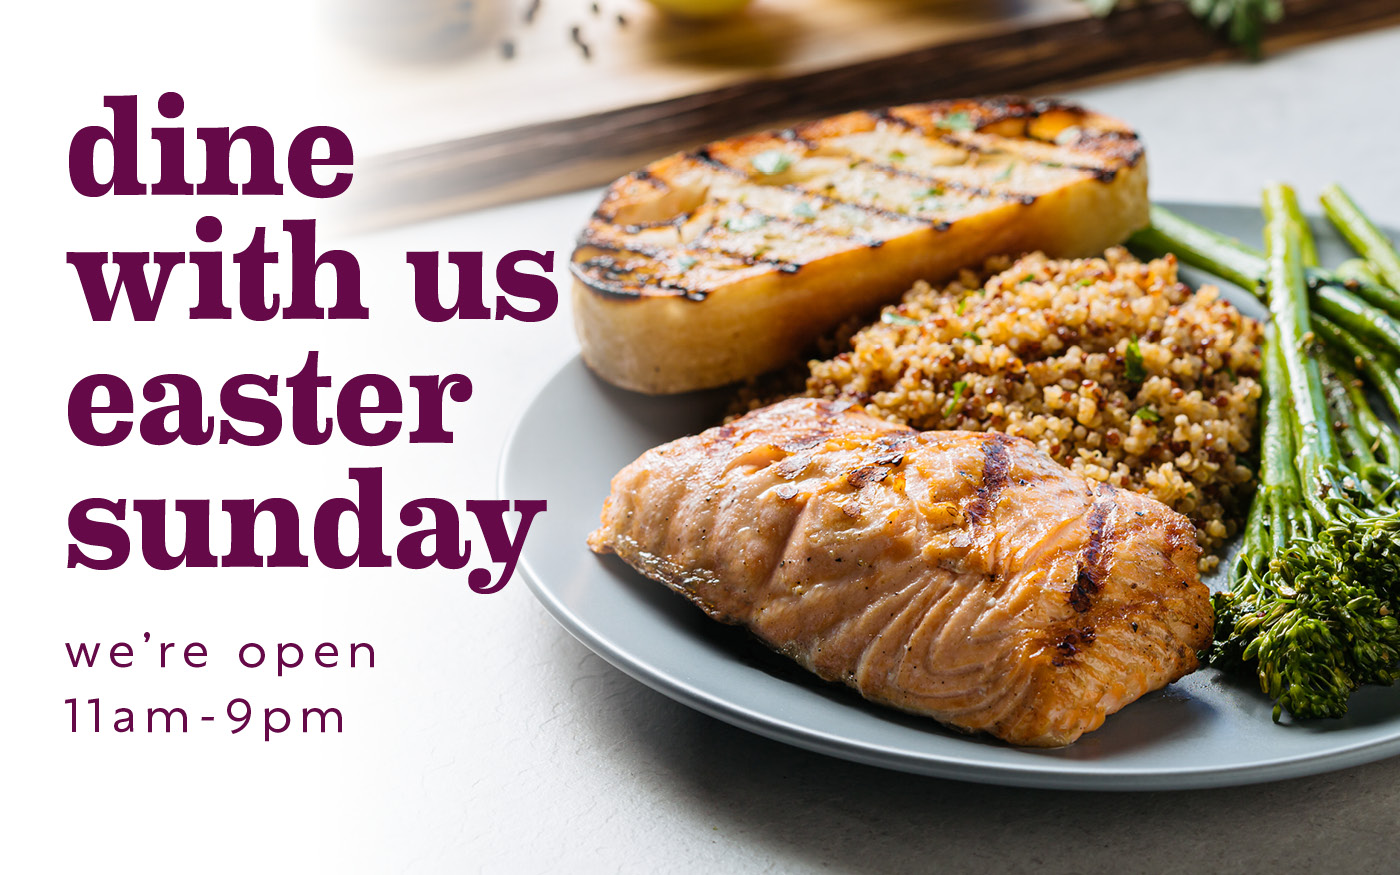 Dine with us Easter Sunday